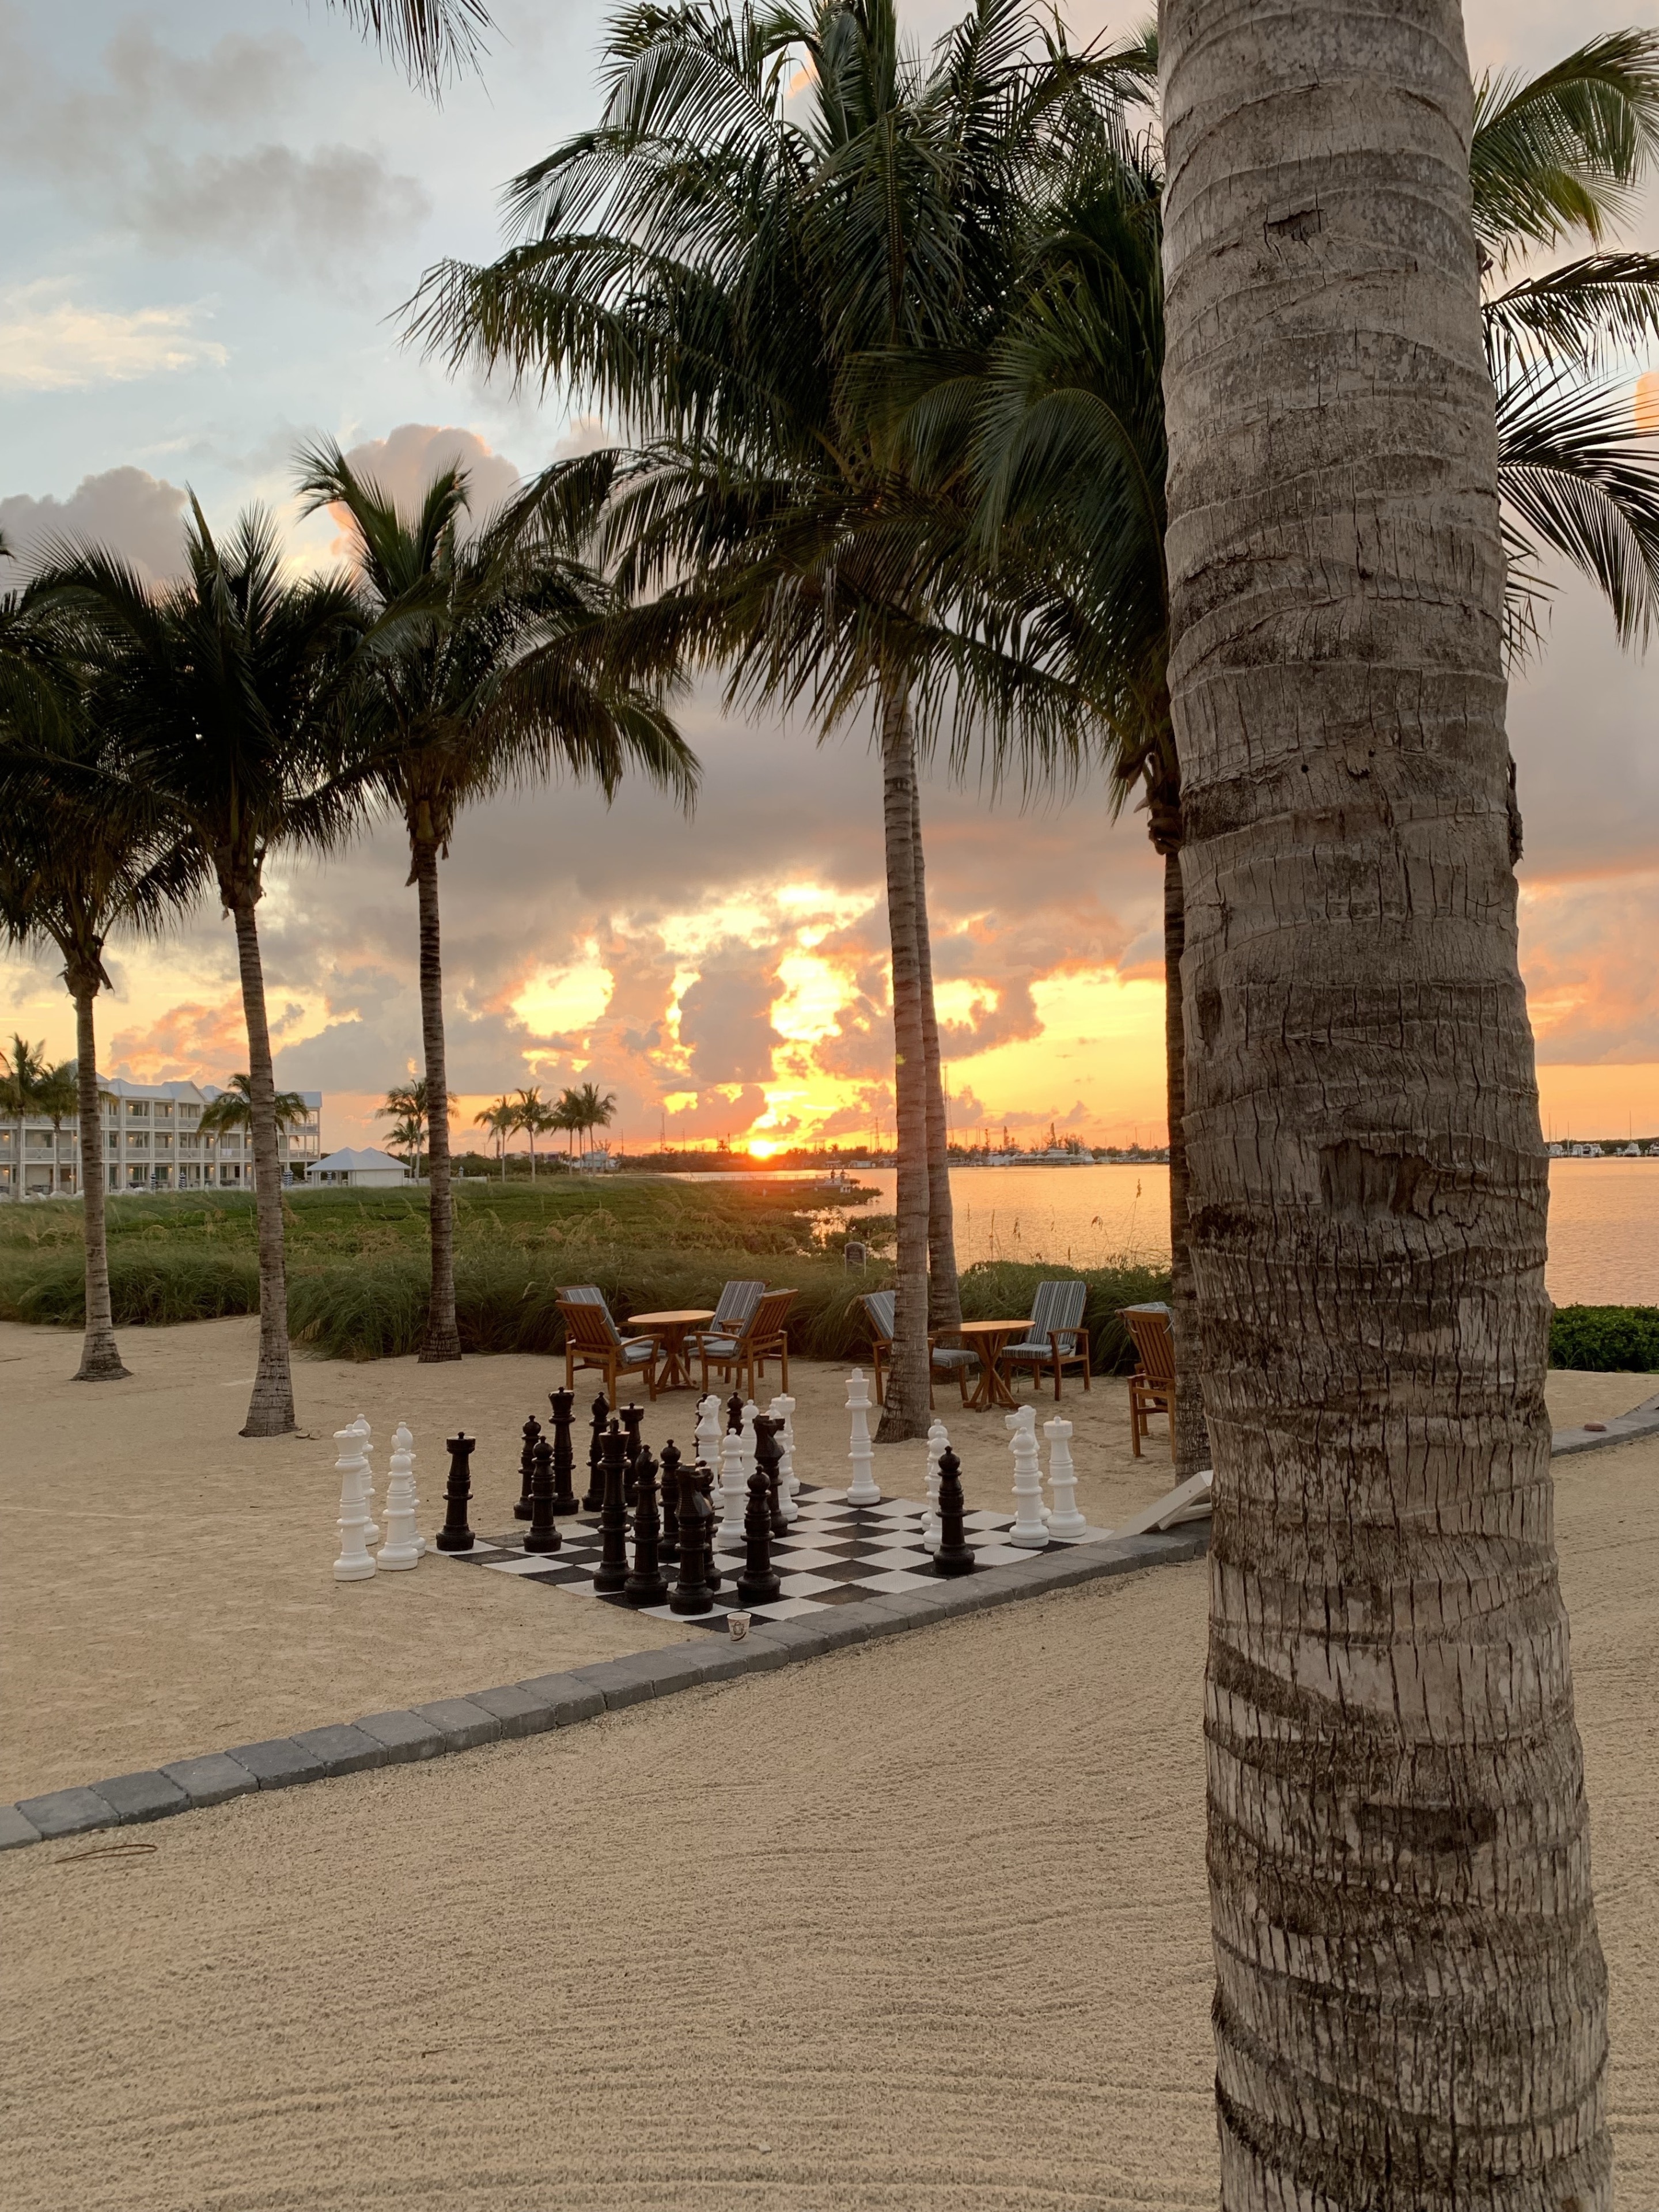 The sunrise at #islabellabeachresort is stunning. The service and amenities are the best in the Florida Keys